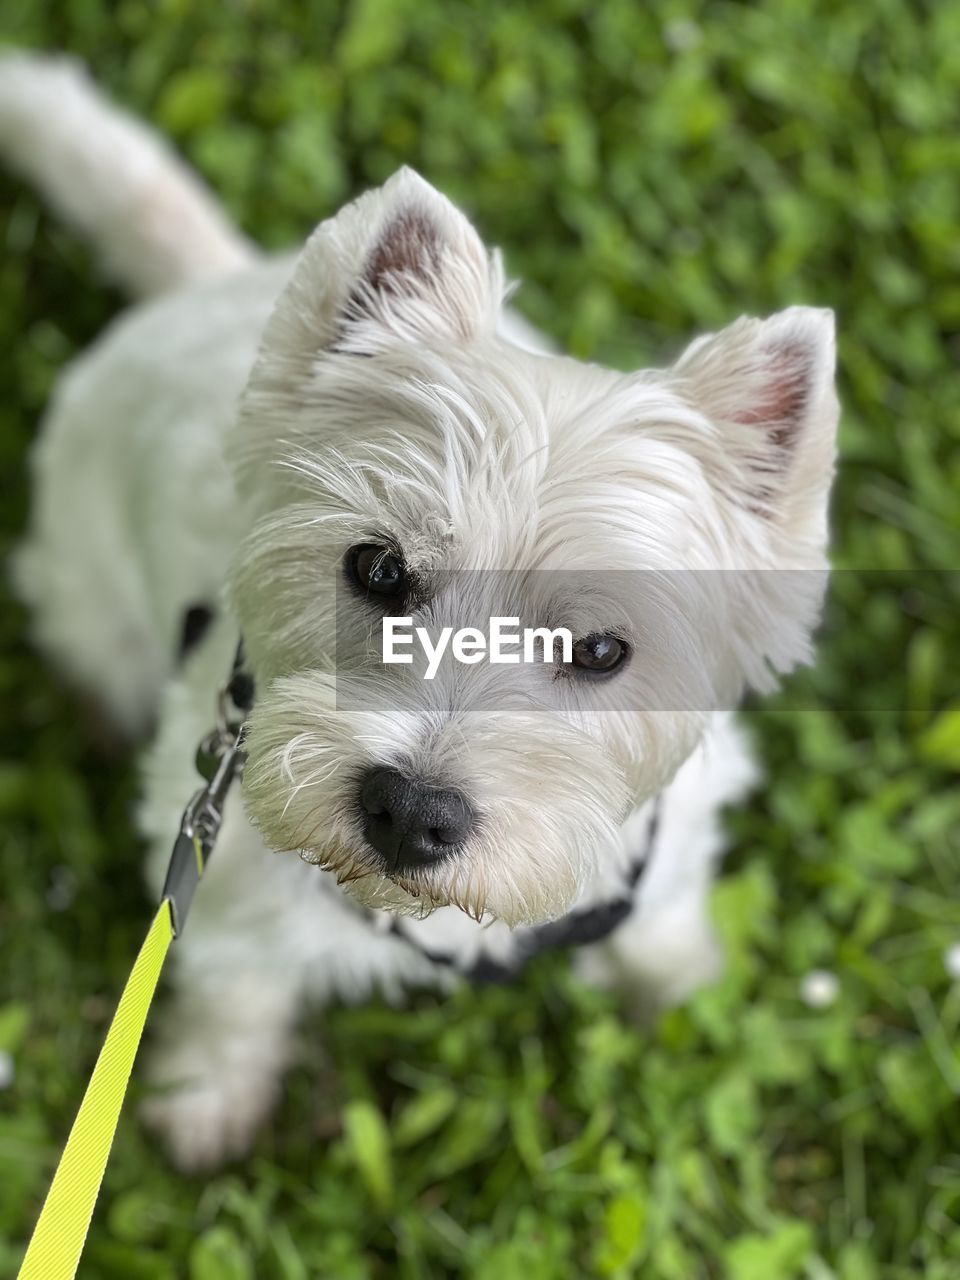 dog, canine, domestic animals, one animal, pet, animal themes, animal, mammal, west highland white terrier, portrait, terrier, cute, looking at camera, grass, plant, young animal, puppy, animal hair, white, no people, nature, lap dog, animal body part, carnivore, focus on foreground, outdoors